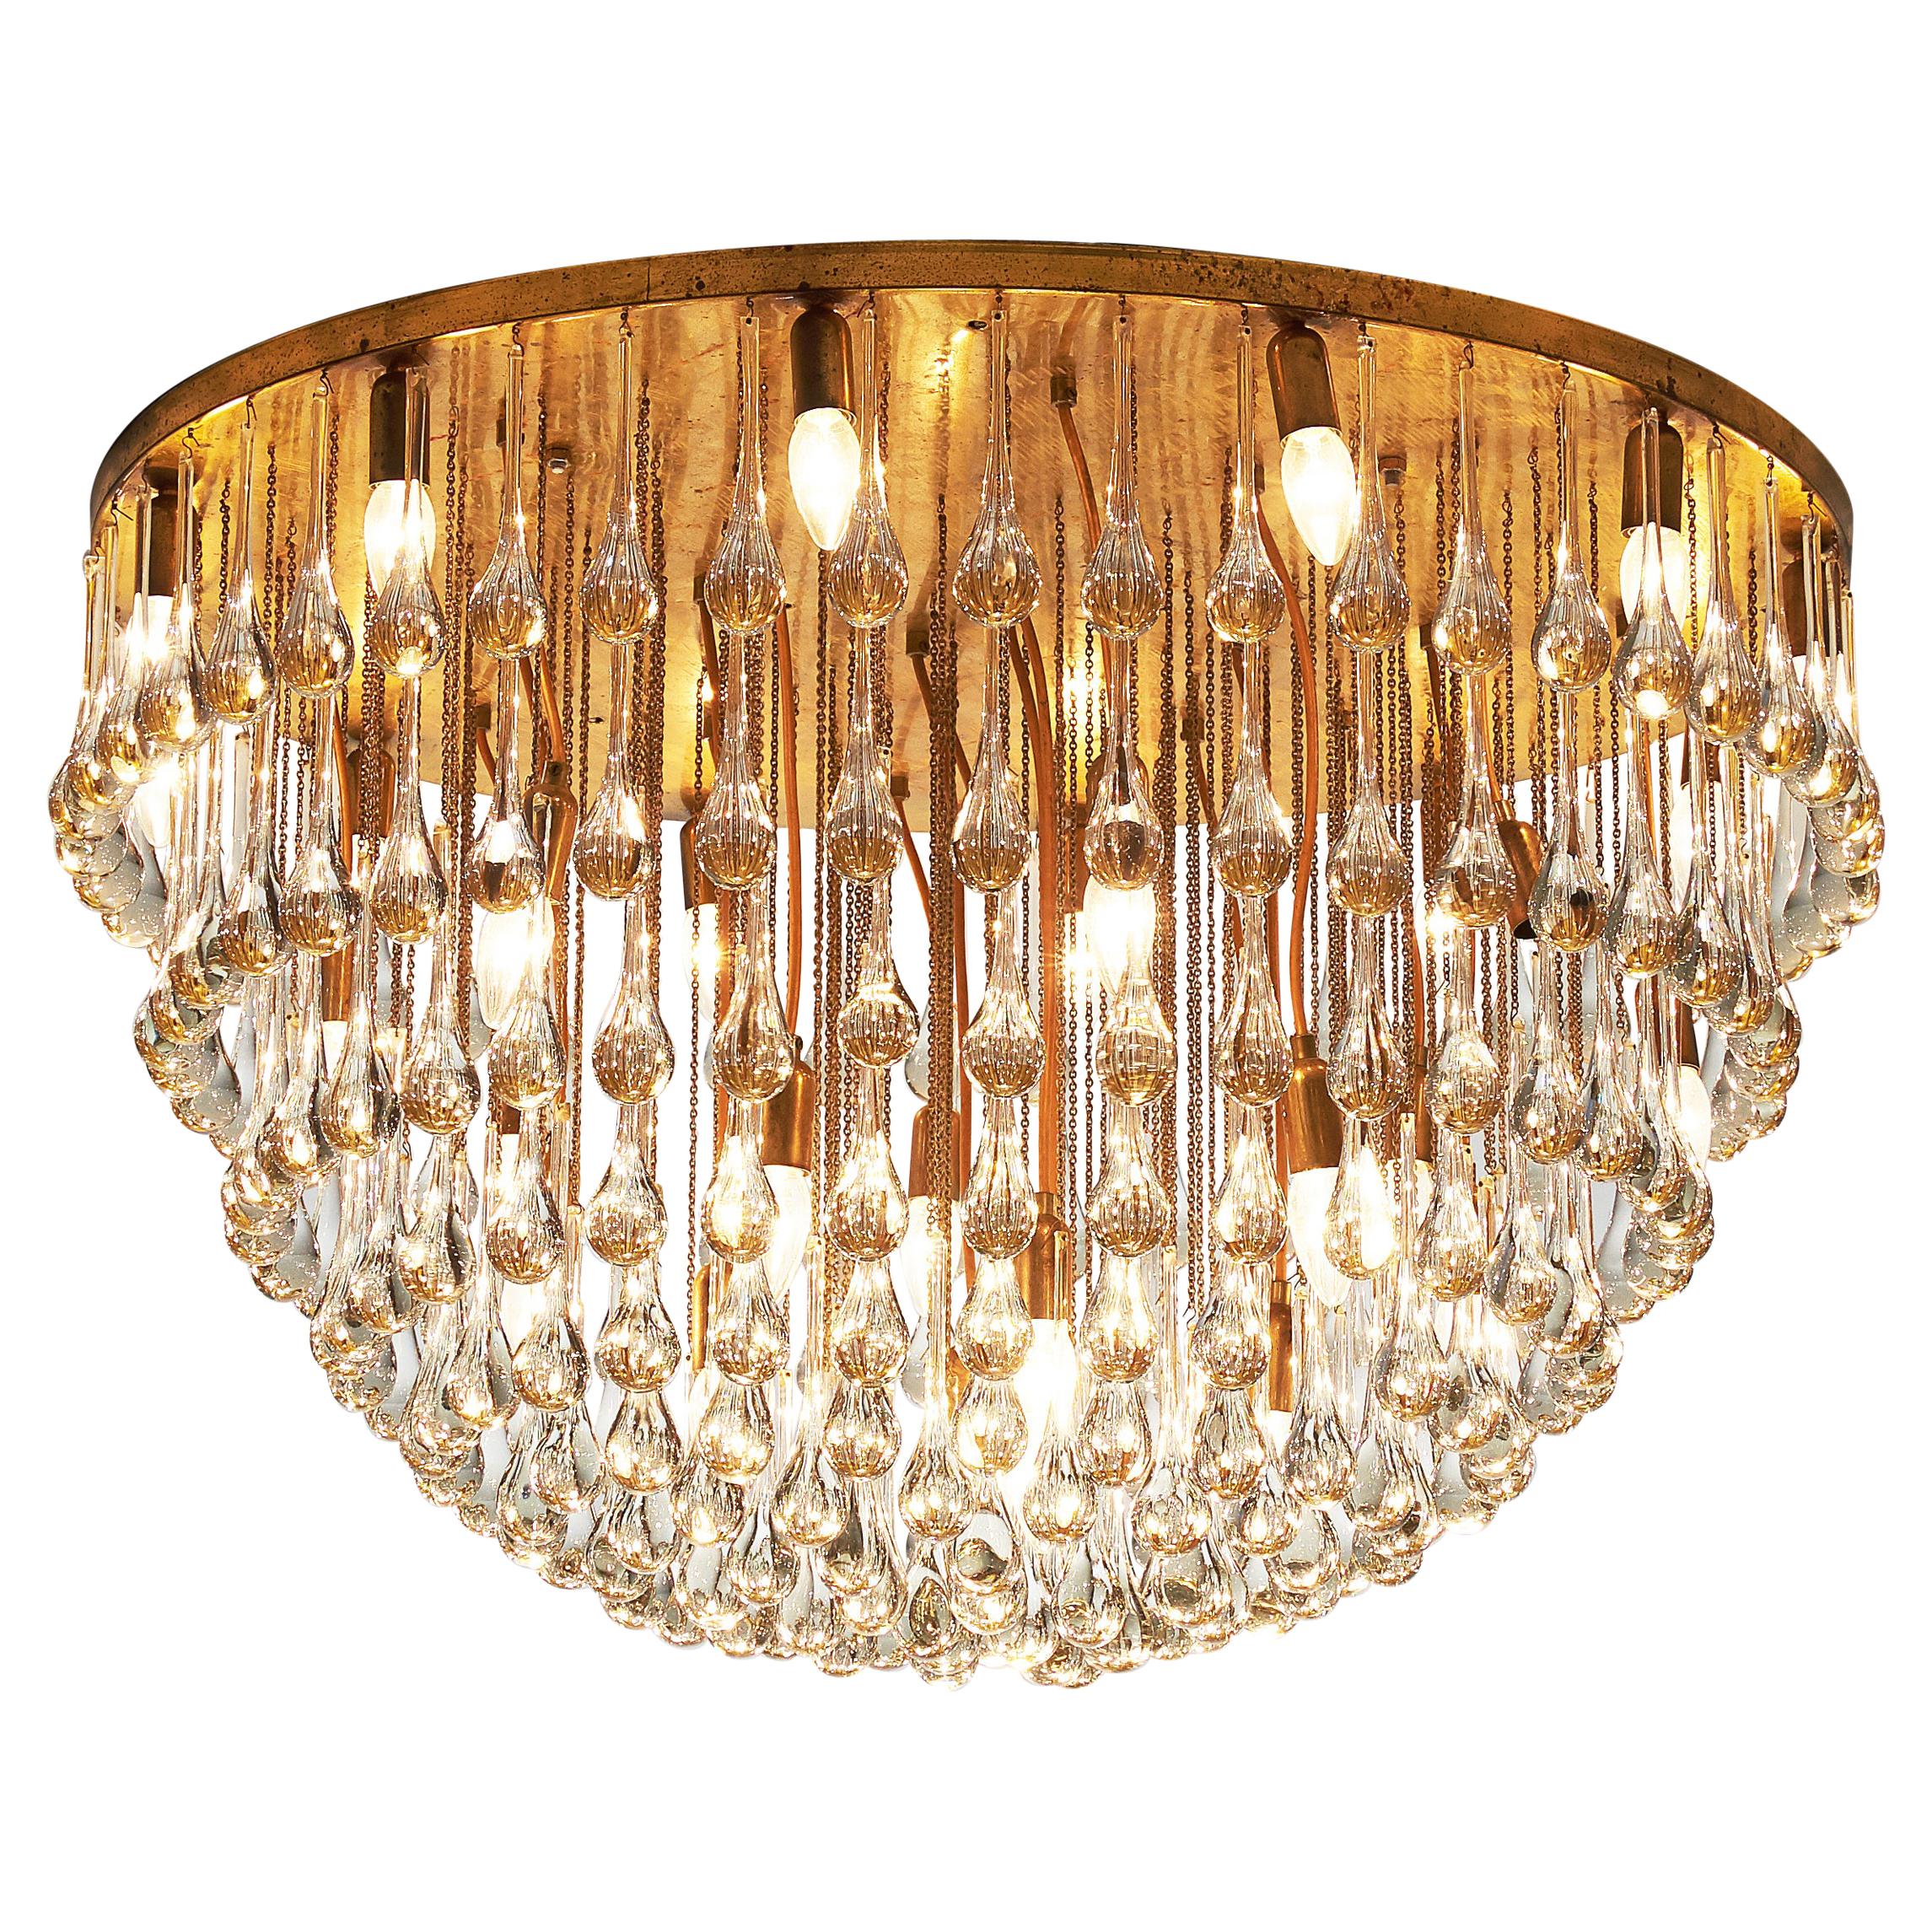 Large Italian Chandelier in Brass with Glass Drops